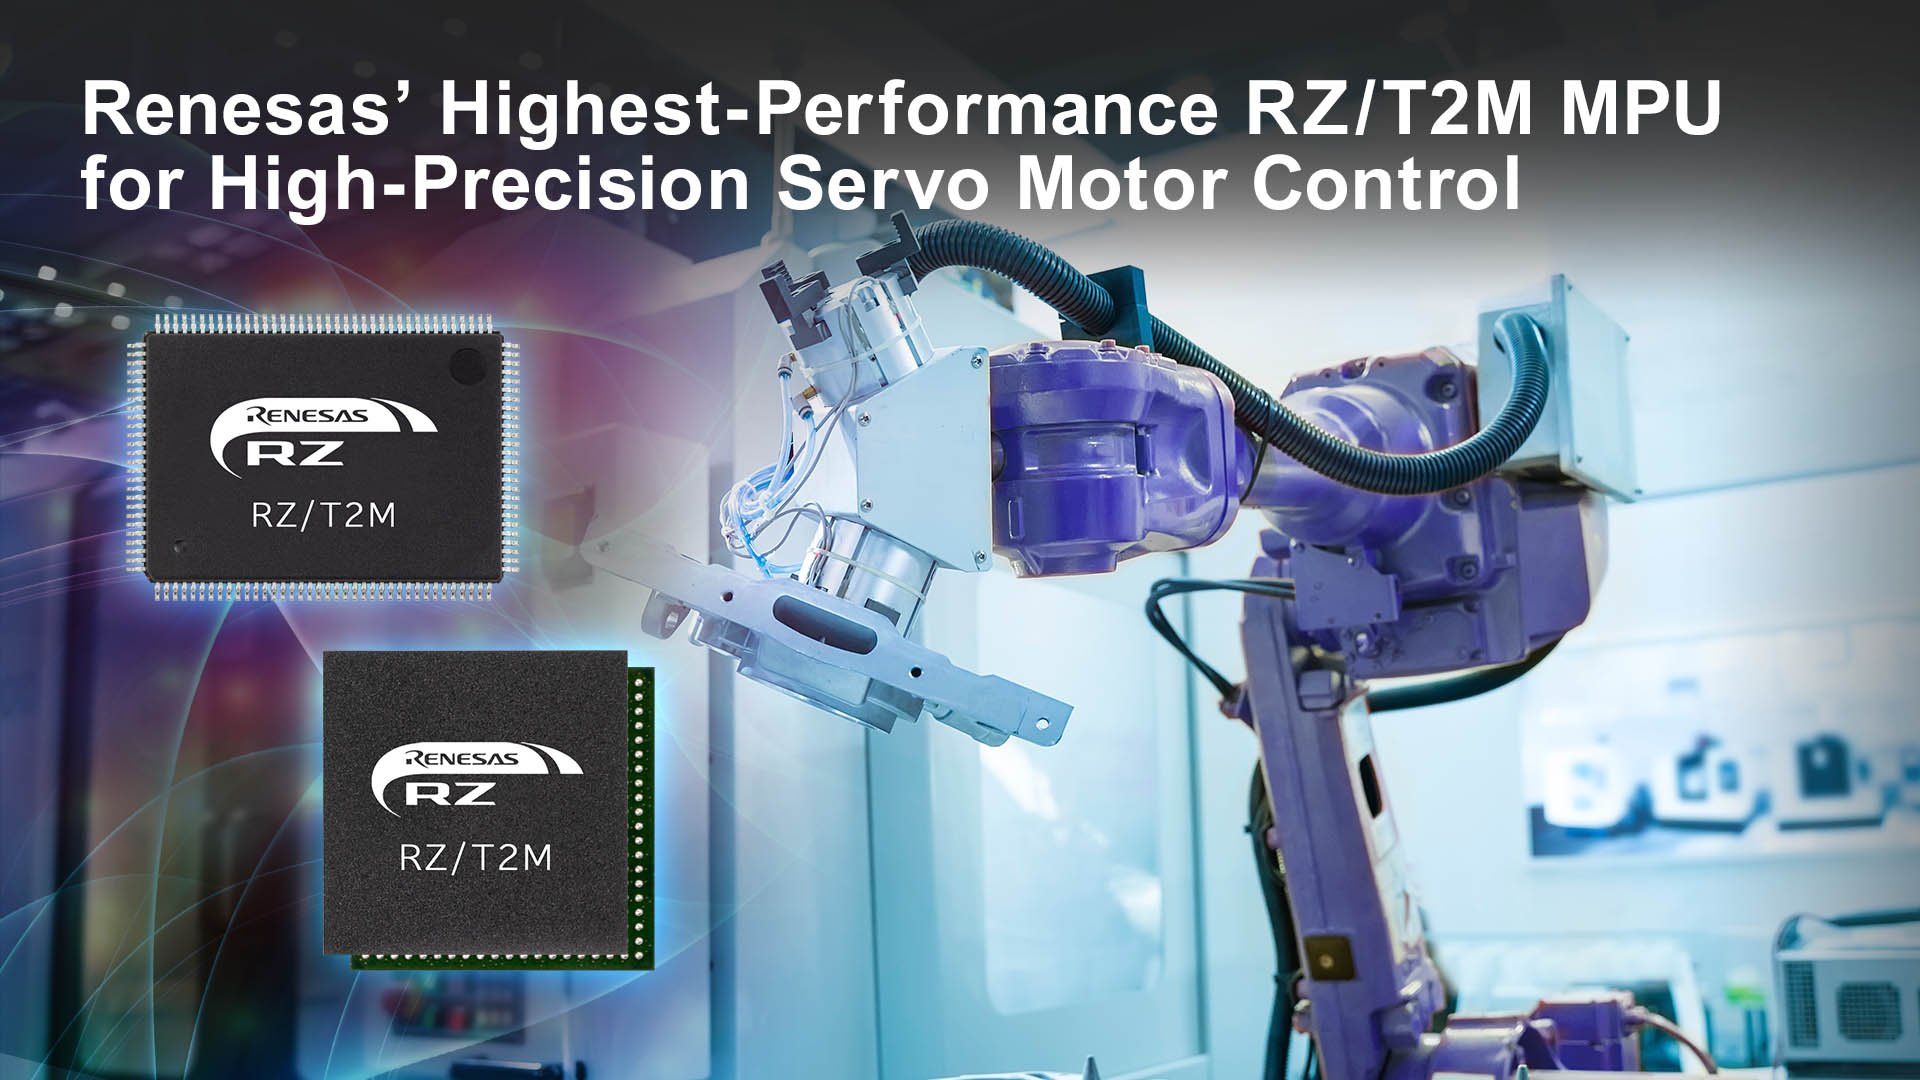 Renesas Releases Its Highest-Performance RZ/T2M Motor Control MPU